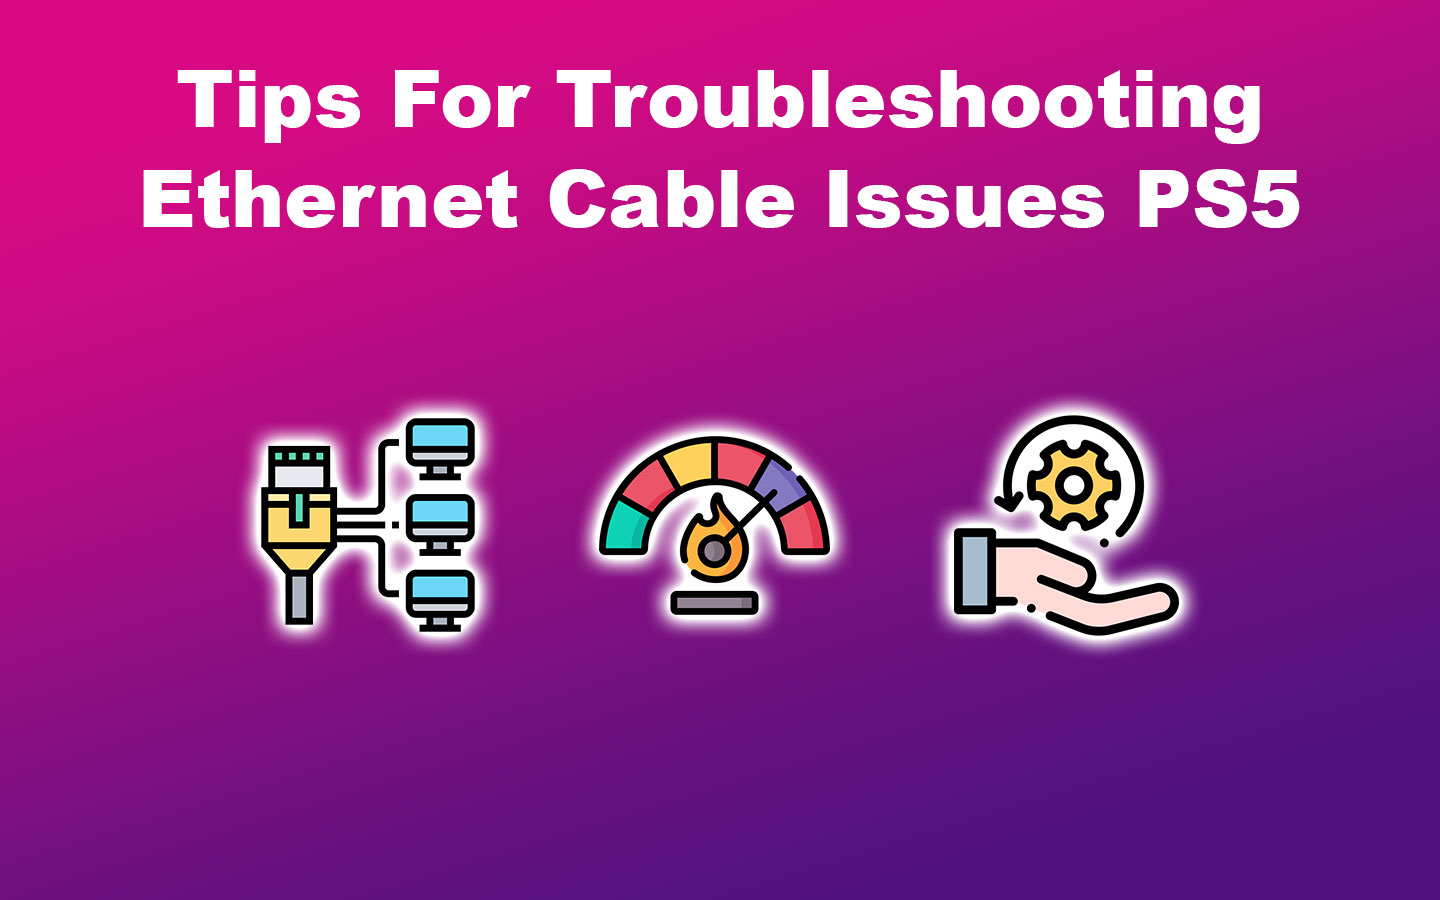 Tips For Troubleshooting Ethernet Cable Issues PS5